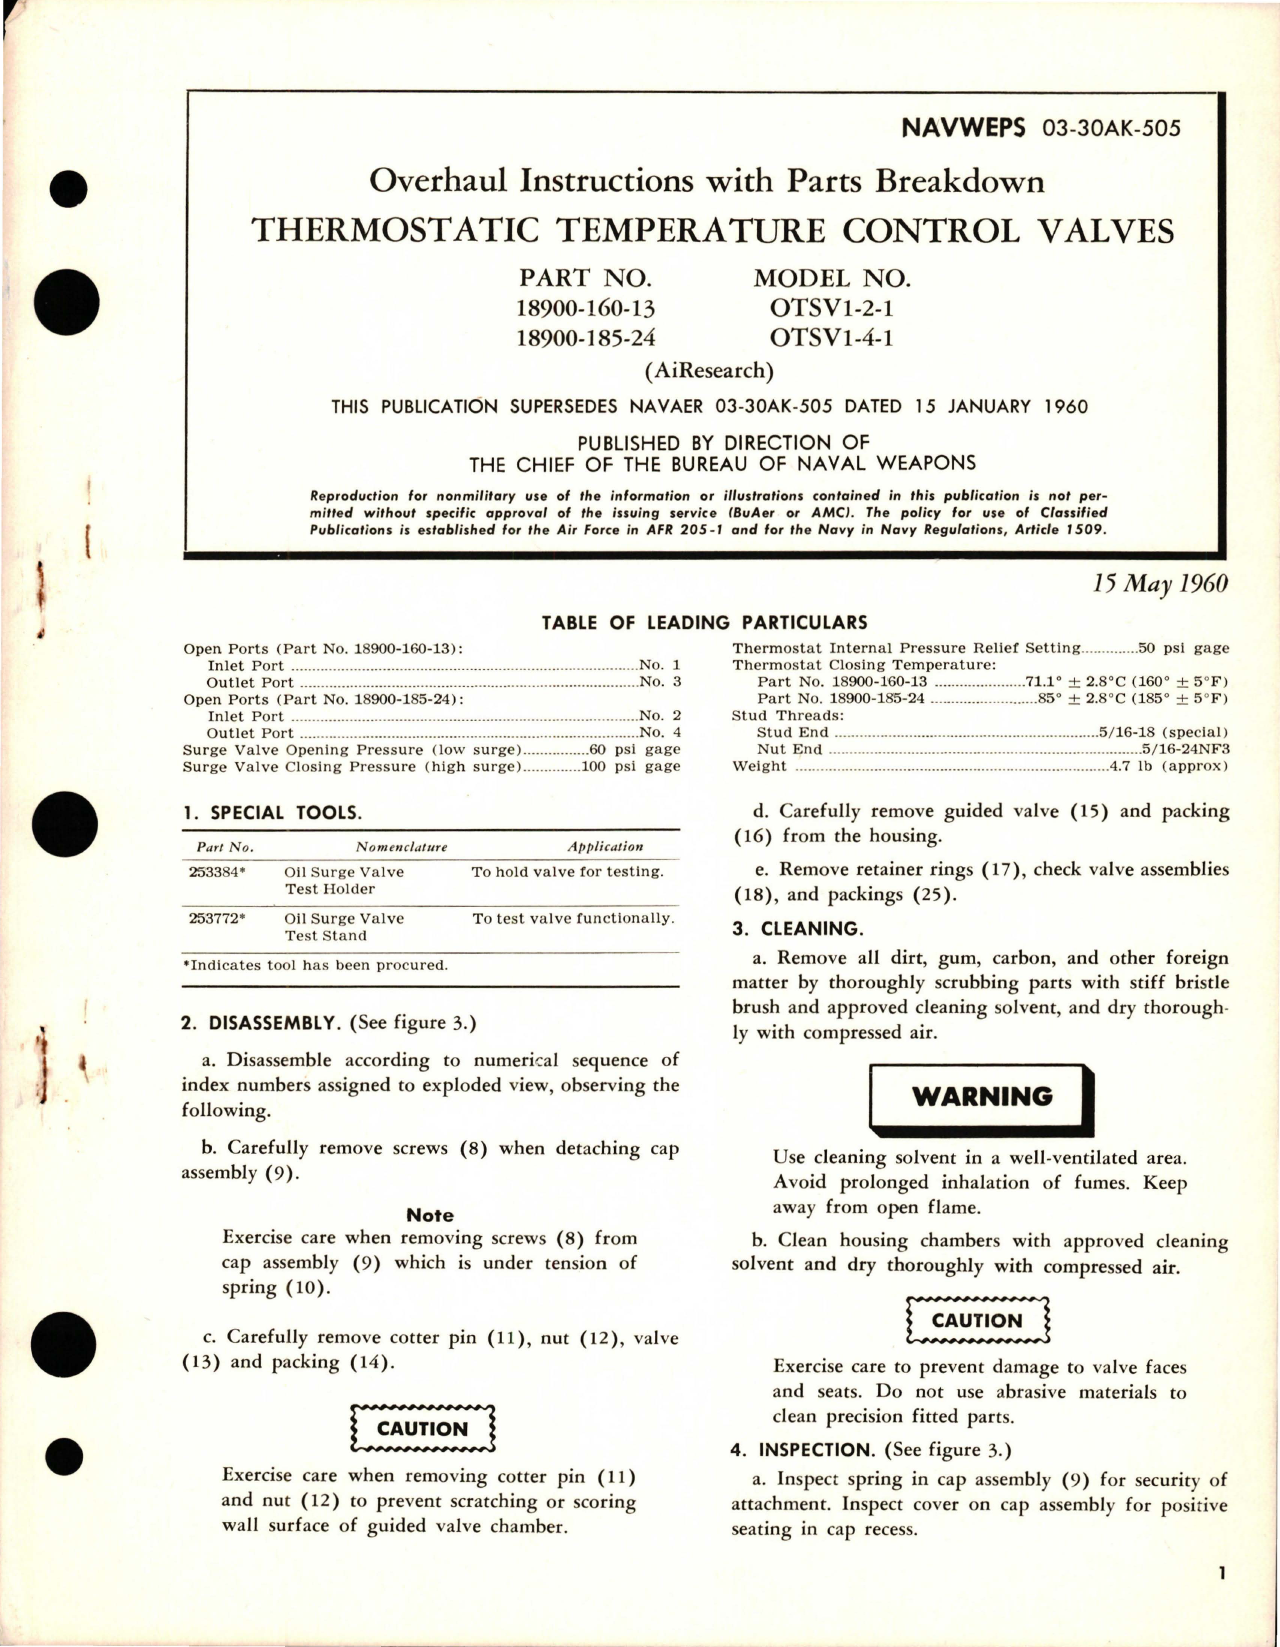 Sample page 1 from AirCorps Library document: Overhaul Instructions with Parts Breakdown for Thermostatic Temperature Control Valves - Parts 18900-160-13 and 18900-185-24